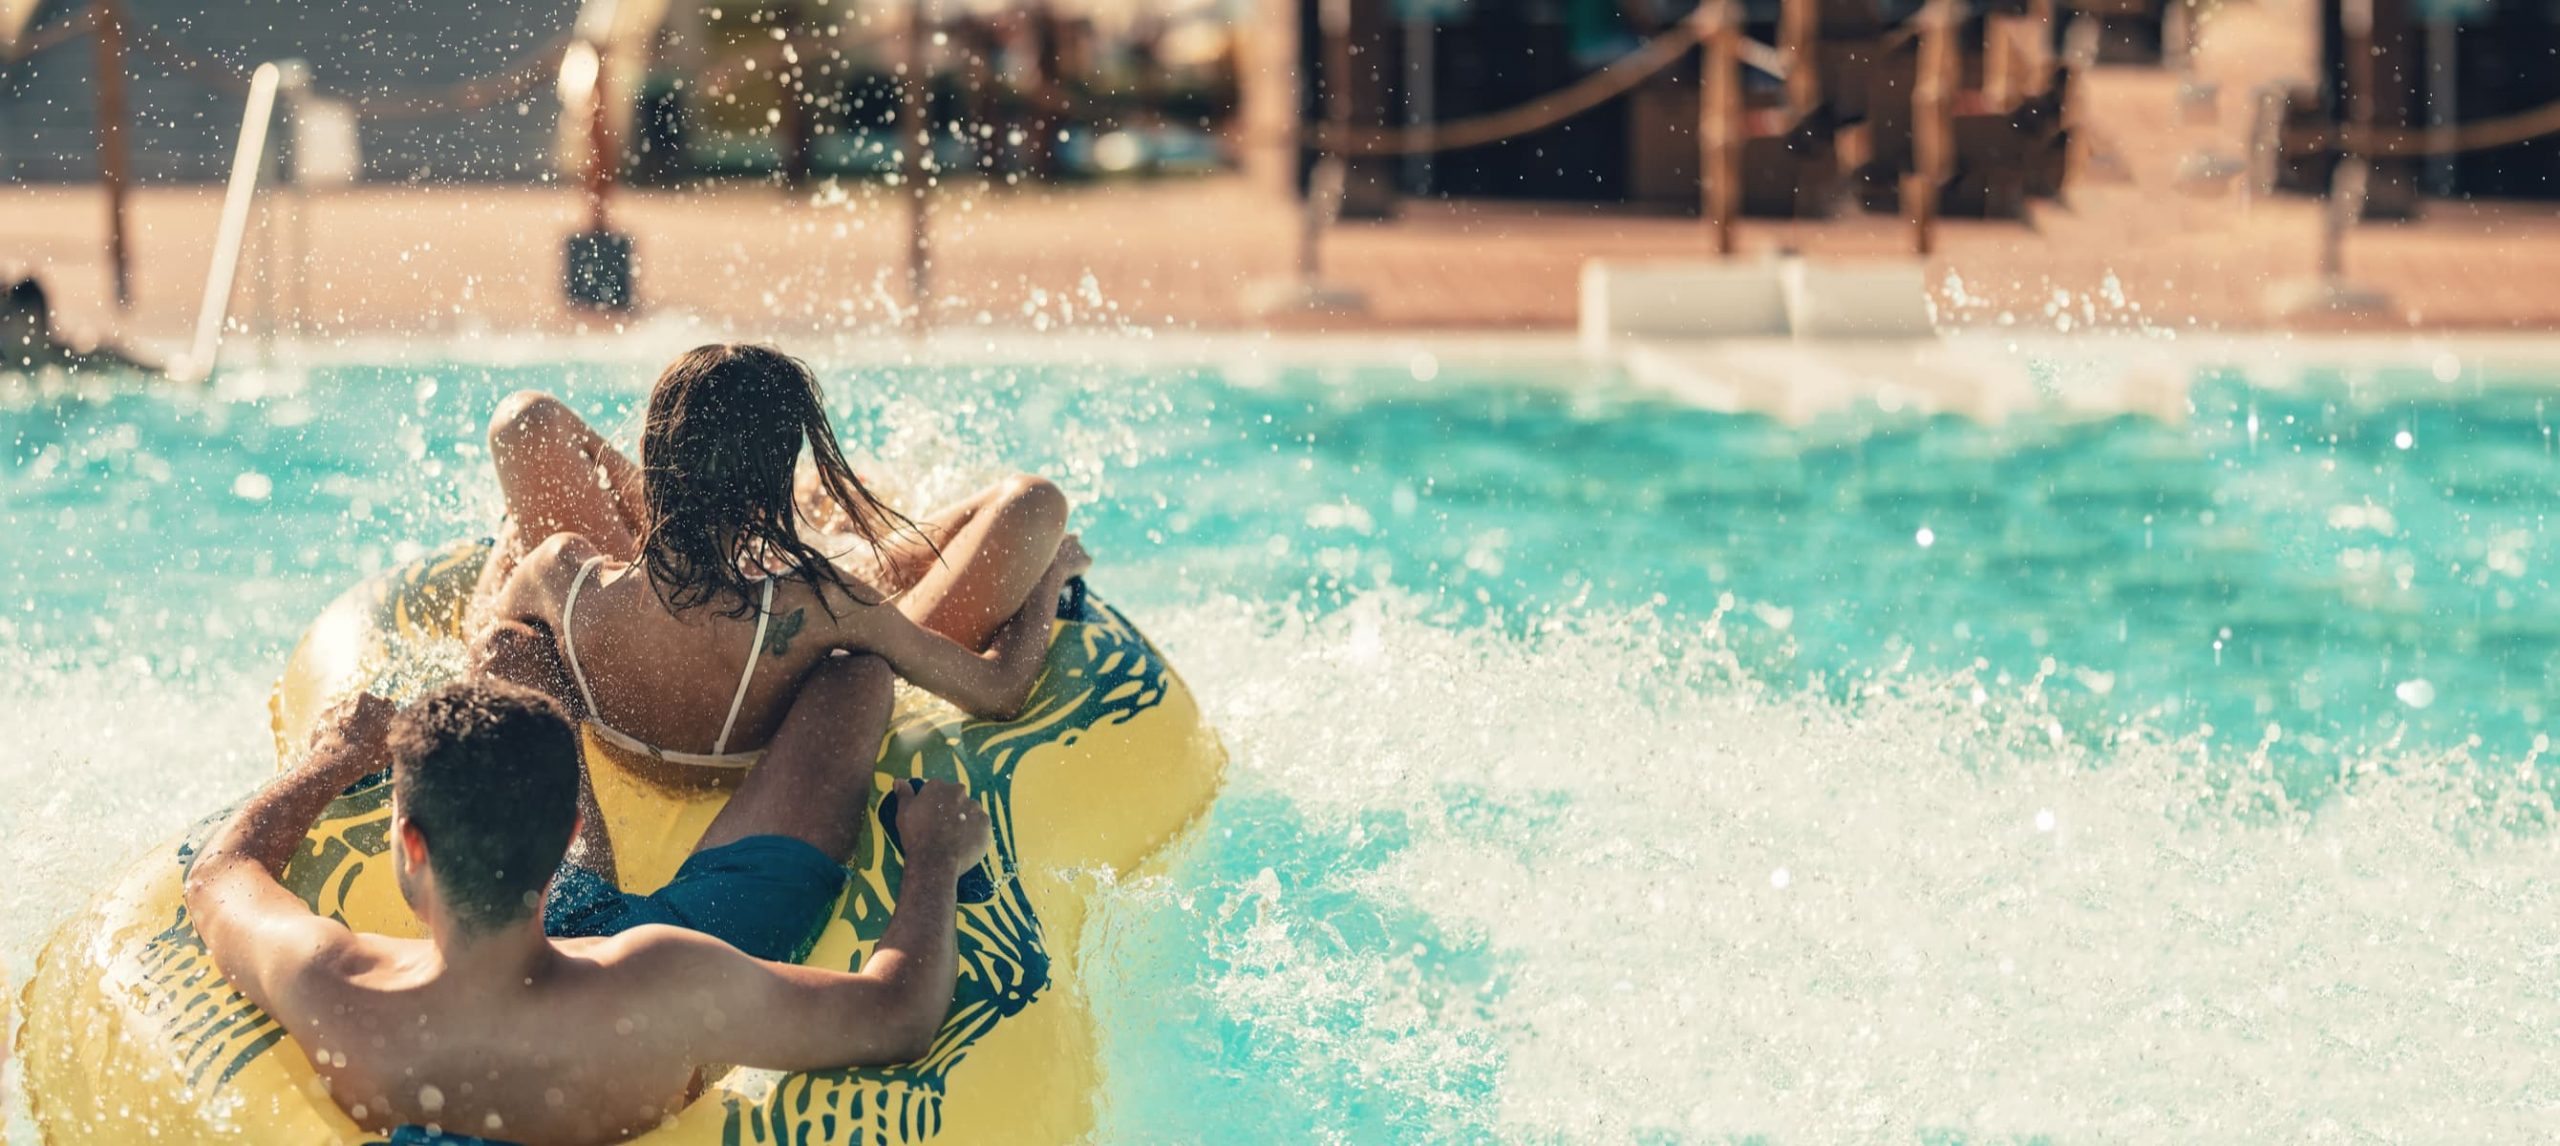 Two children having fun at a water park.